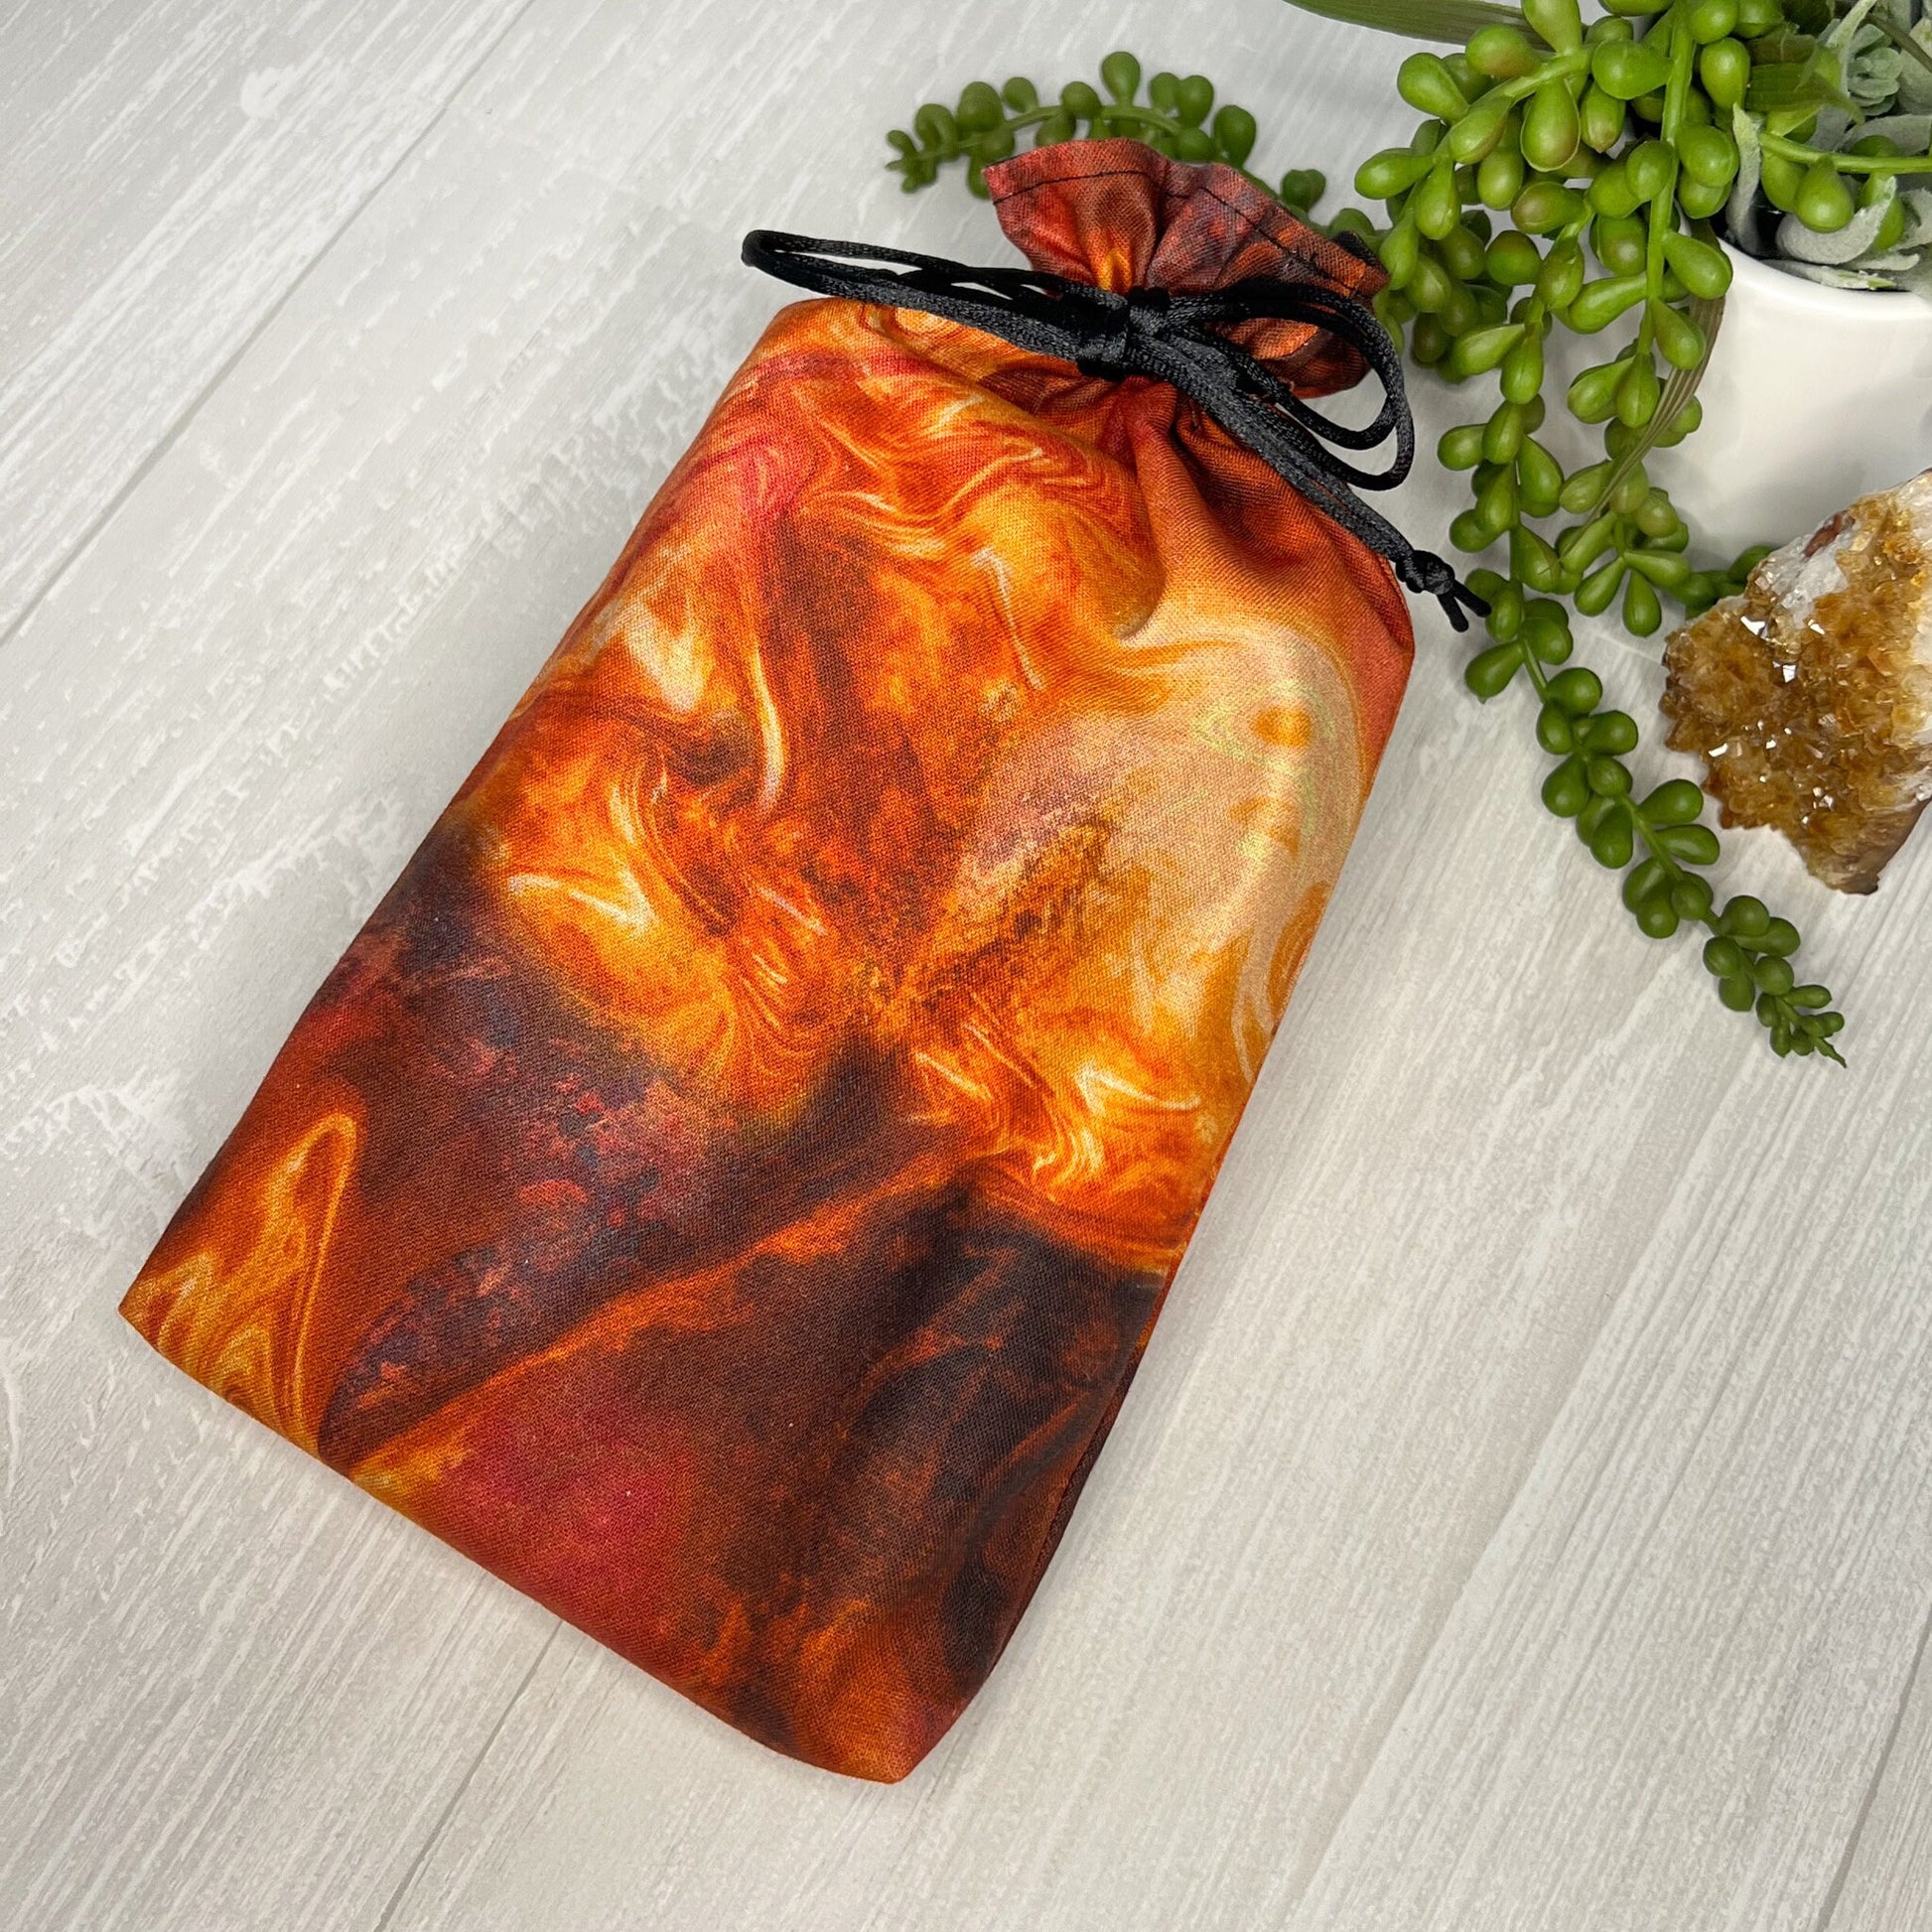 Large Orange Fiery Tarot Deck Bag, Oracle Card Drawstring Pouch, Deck Storage Holder, Pagan Witchcraft Divination Tools Gifts & Supplies